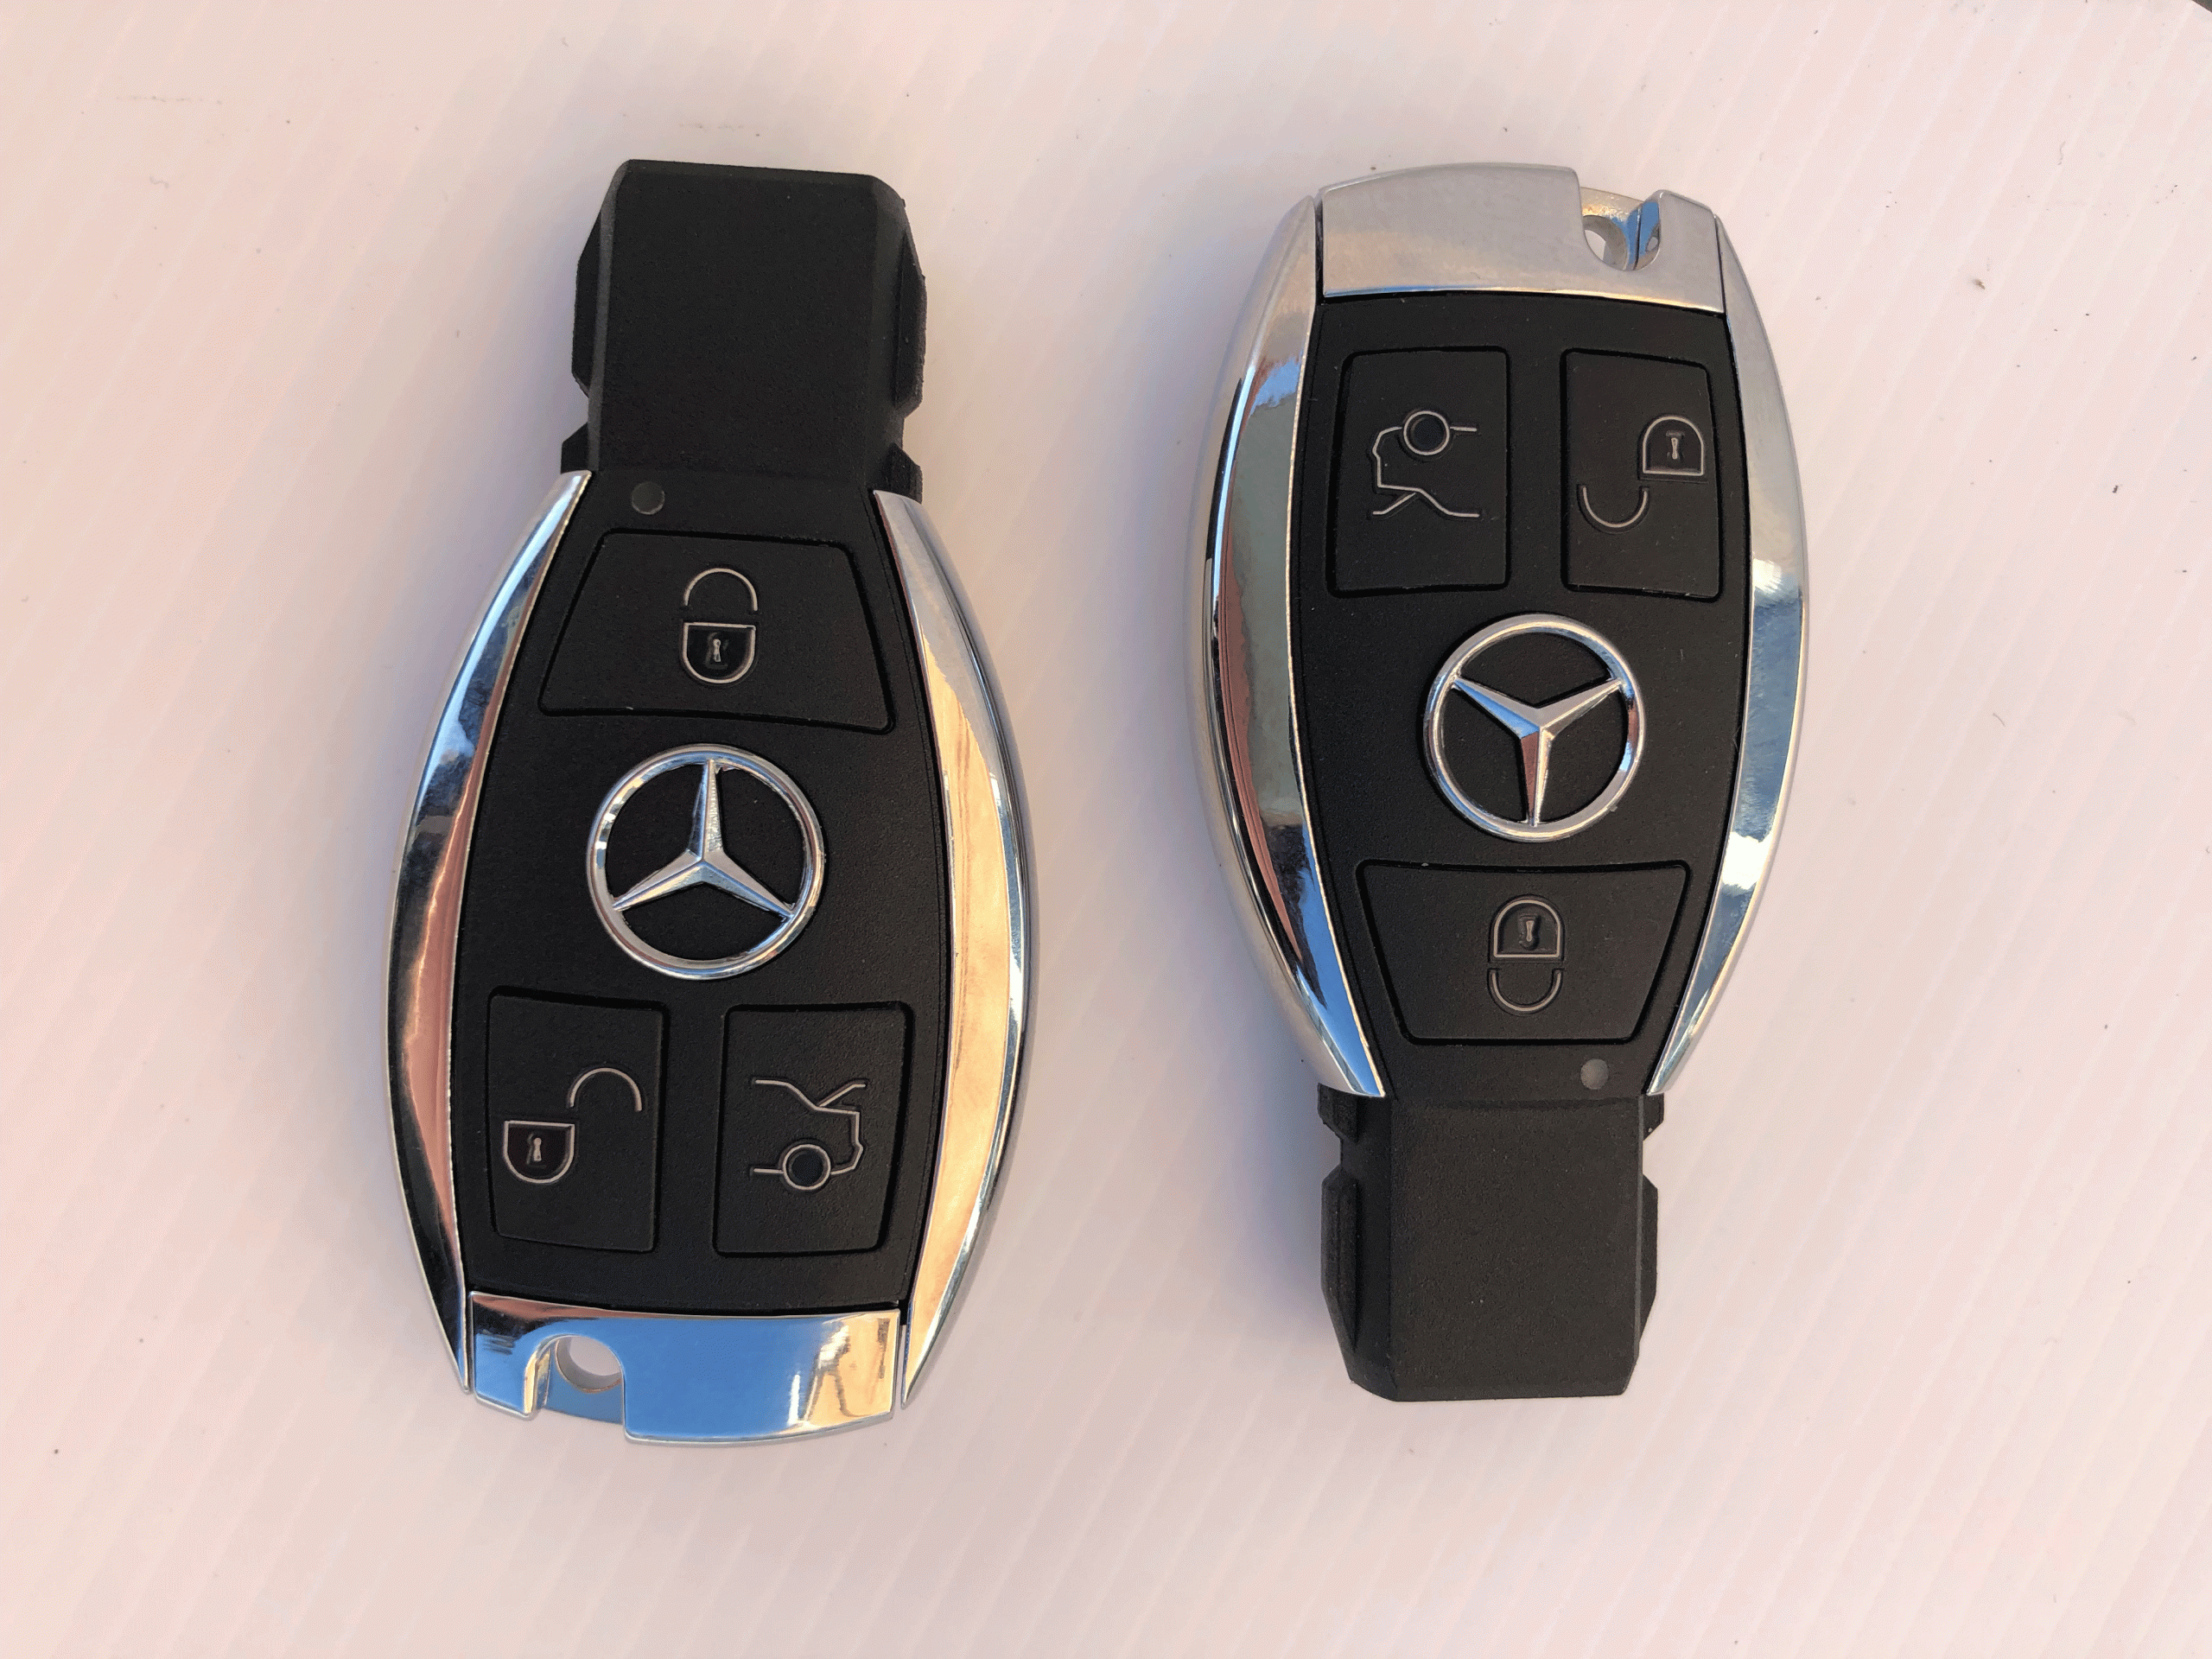 We replace lost and stolen Mercedes keys in the Hull area